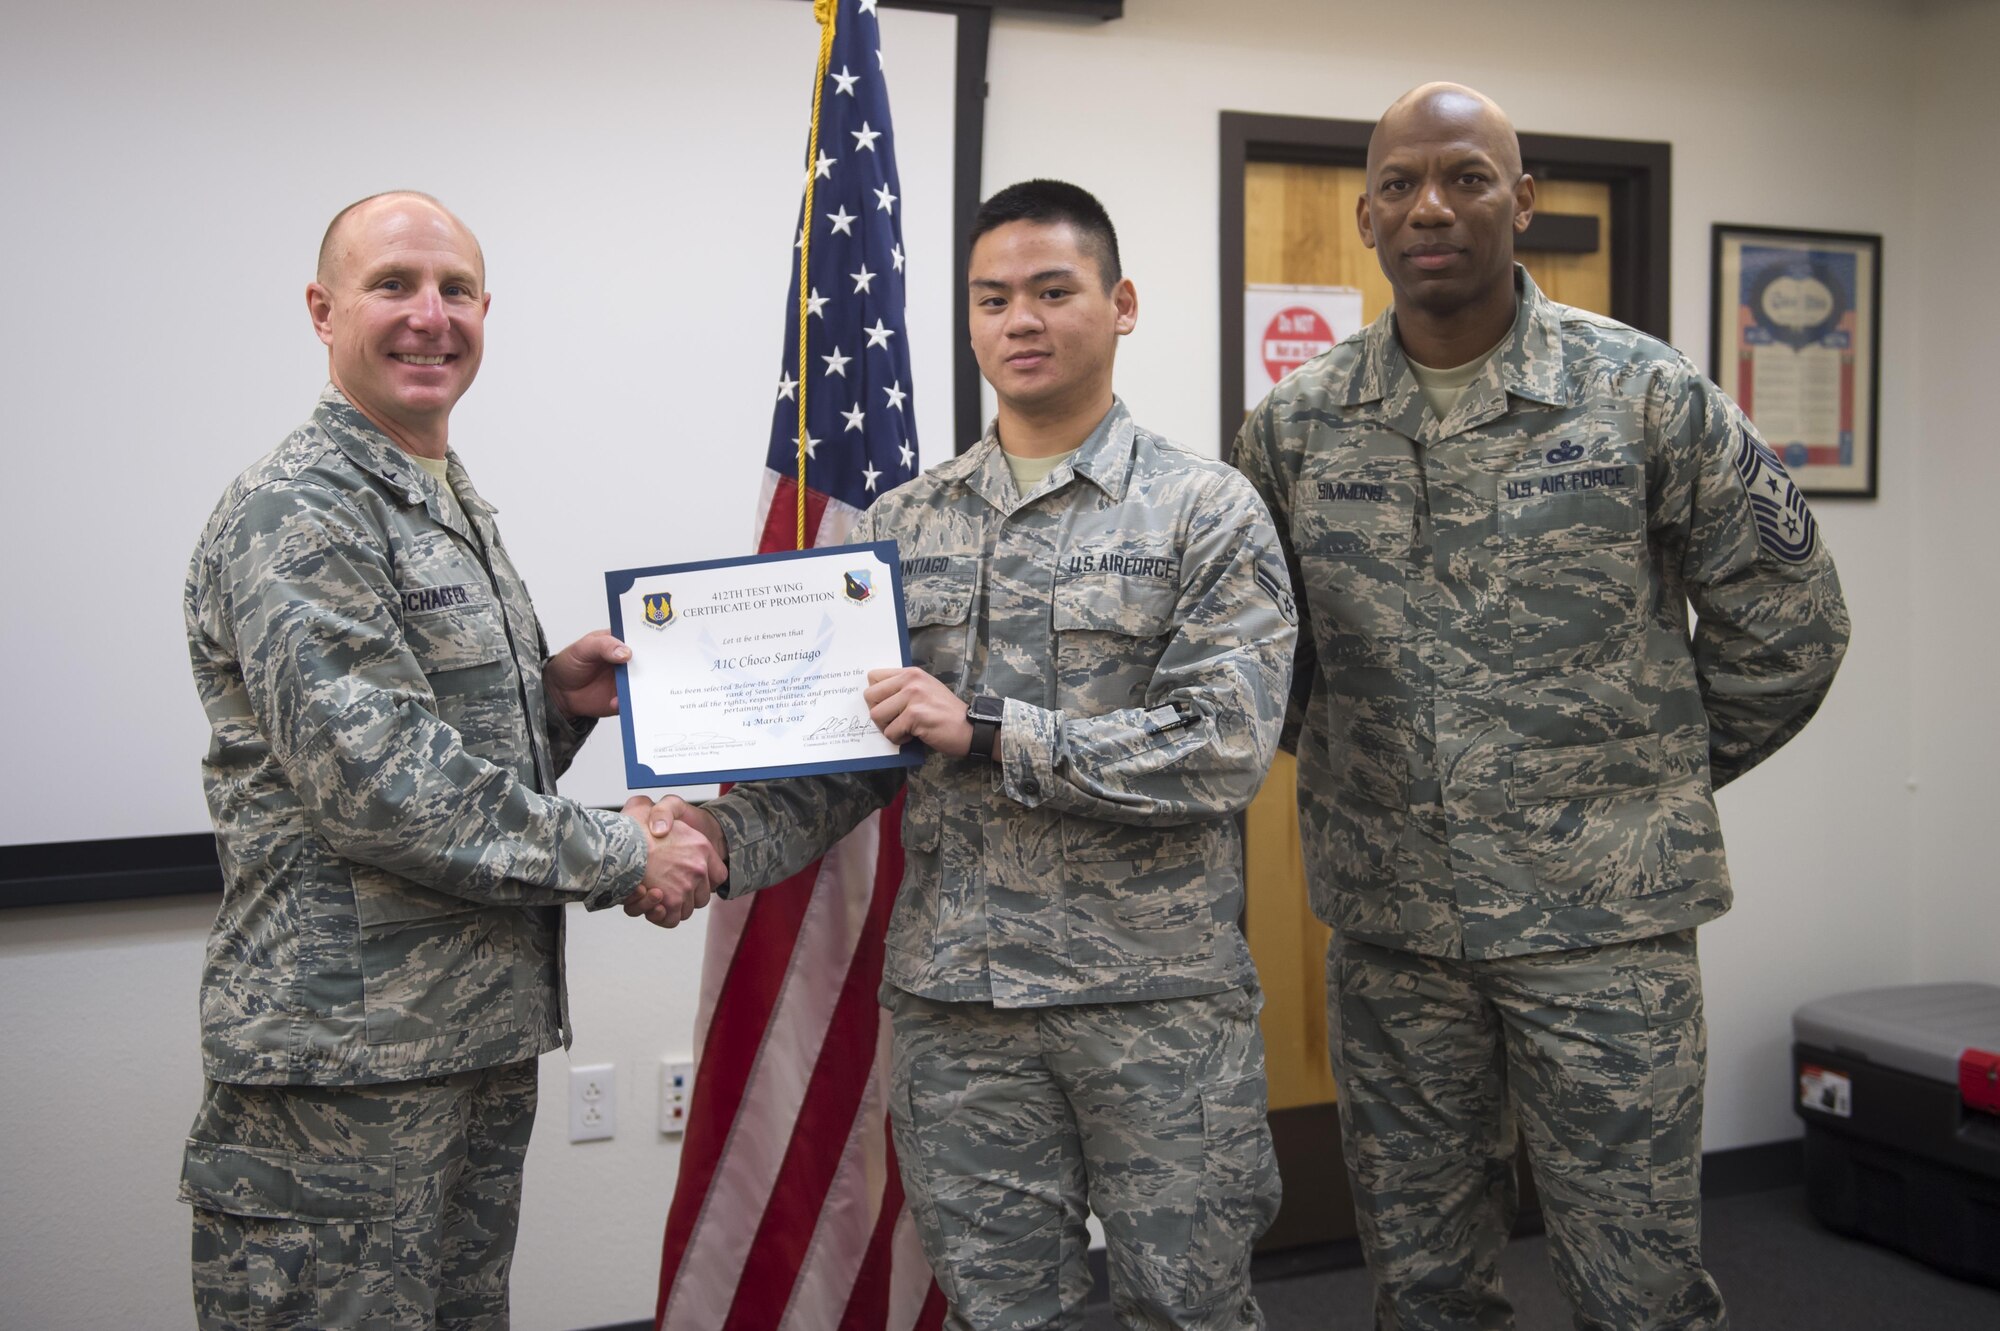 From left: Brig. Gen. Carl Schaefer, 412th Test Wing commander, presented Airman 1st Class Choco Santiago, 412th Comptroller Squadron, with a below-the-zone promotion March 16 along with Chief Master Sgt. Todd Simmons, 412th TW command chief. (U.S. Air Force photo by Kyle Larson)